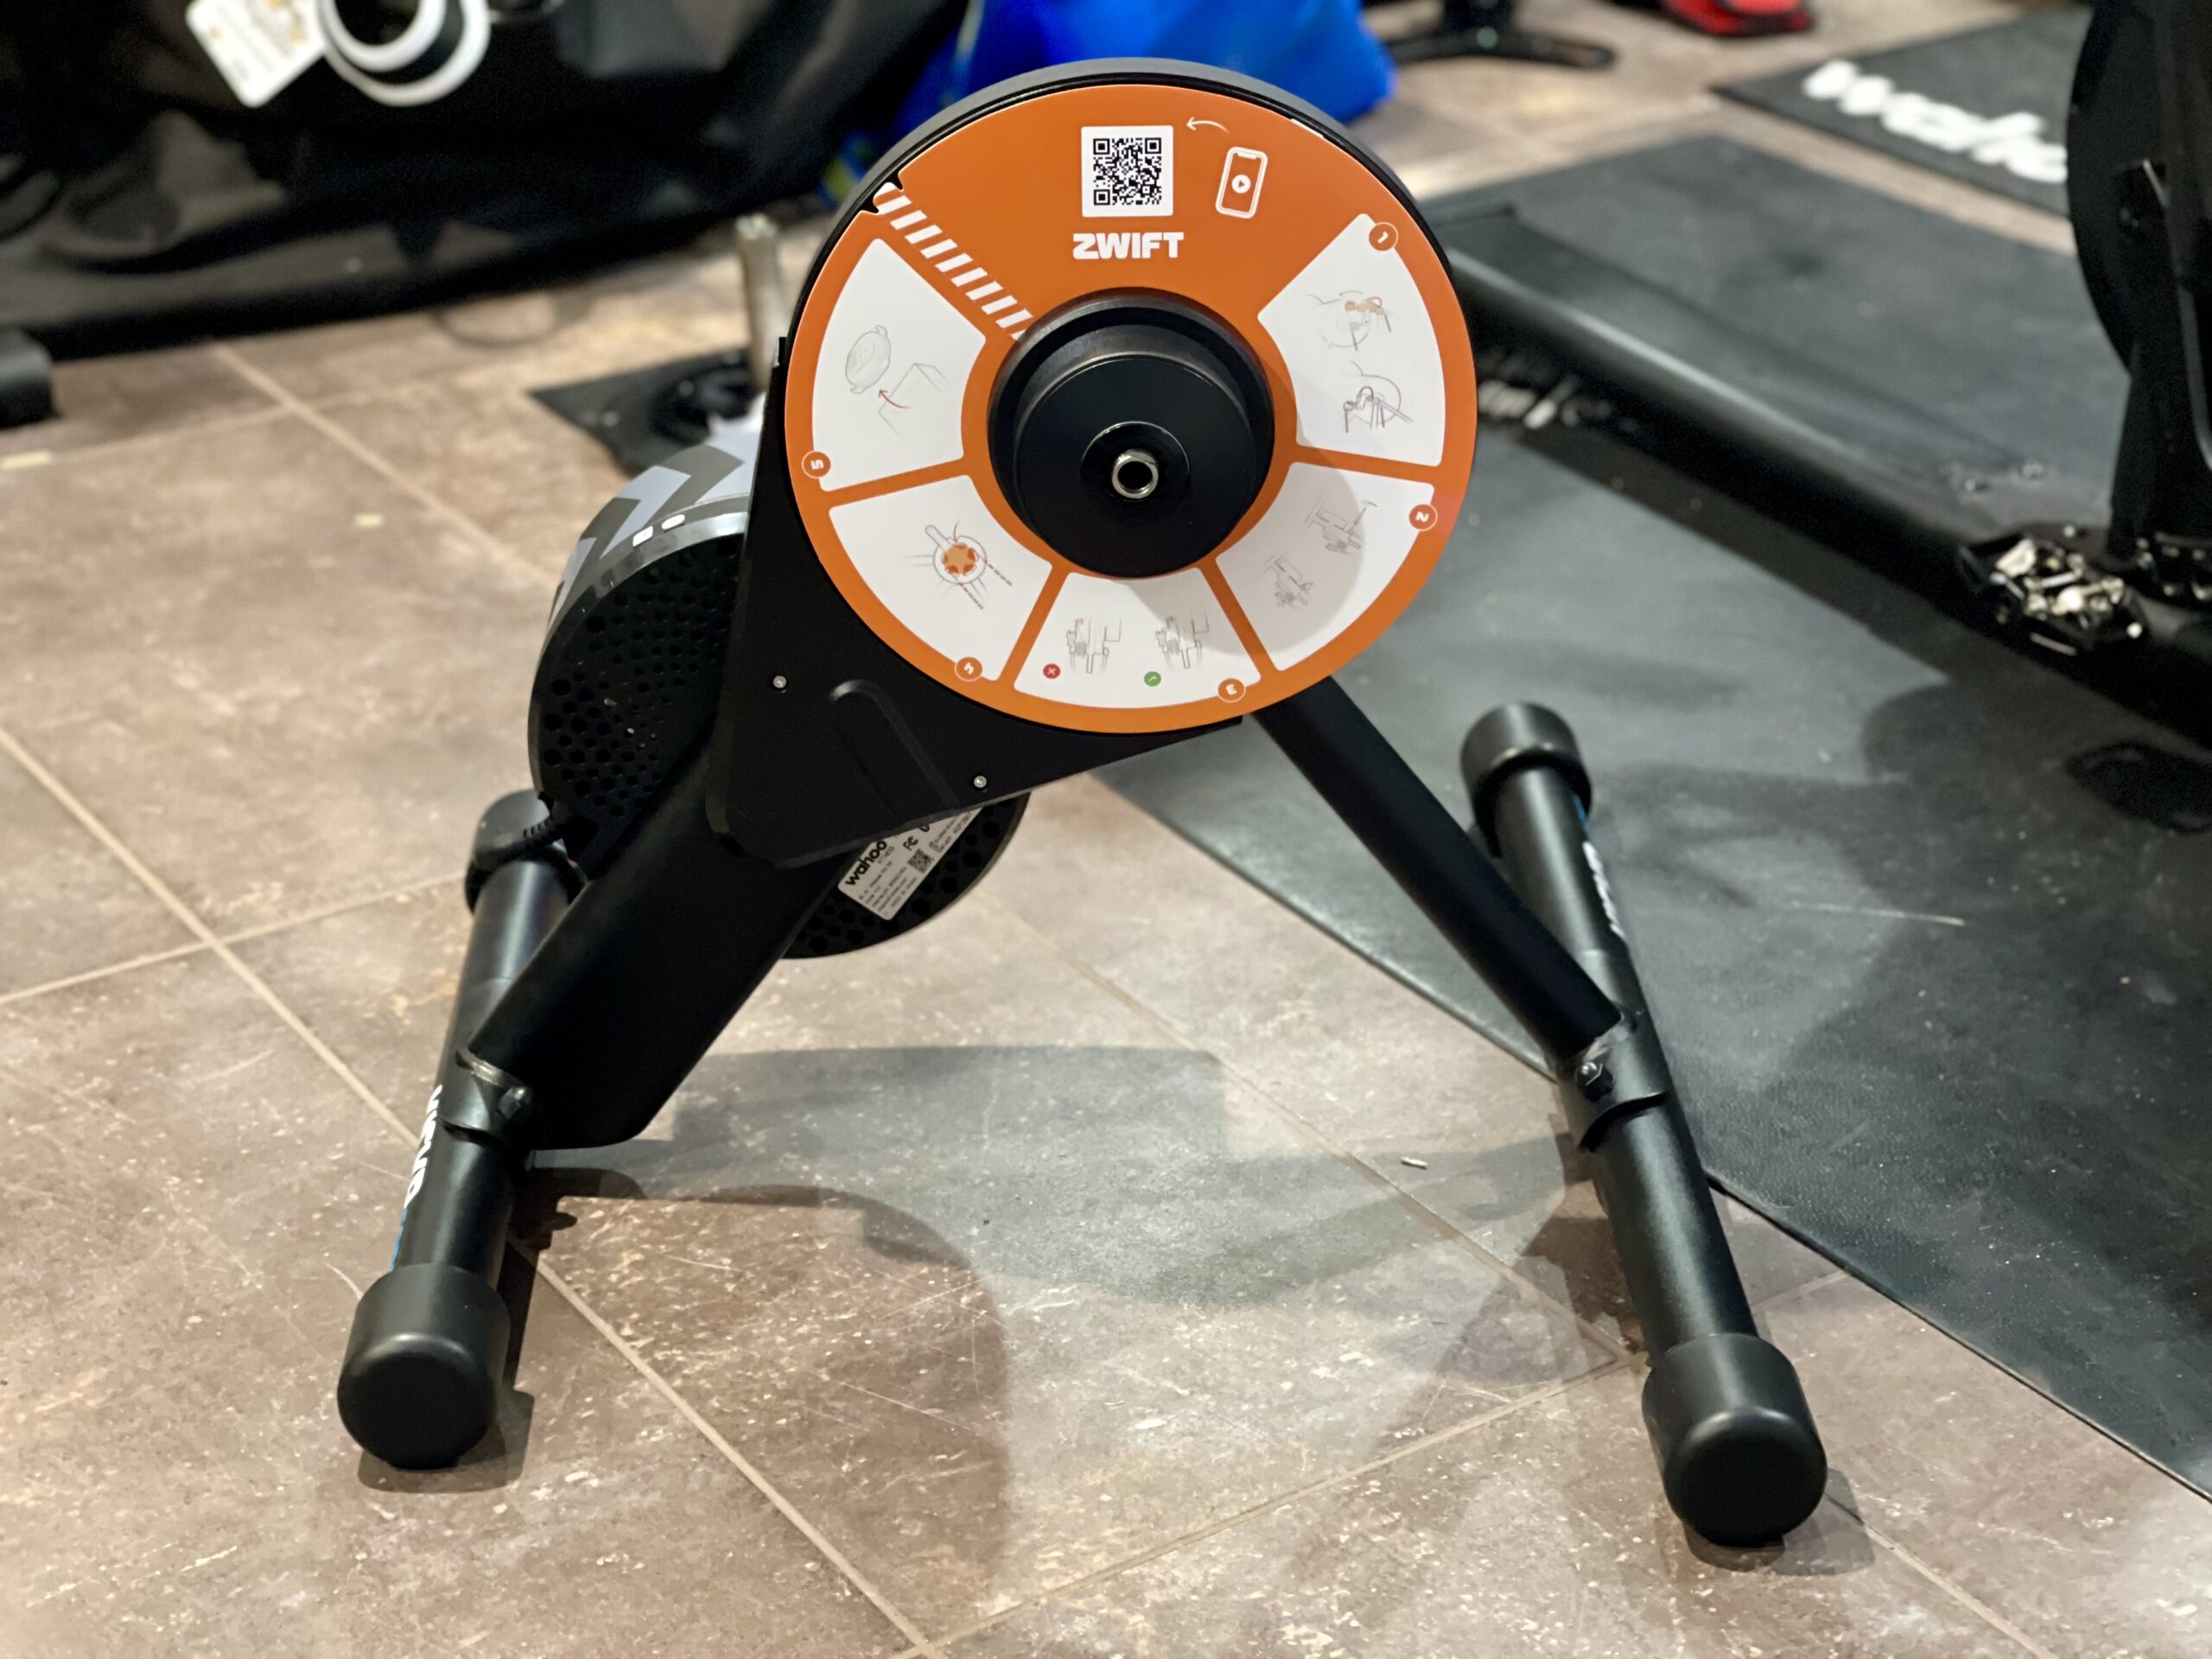 New KICKR CORE Zwift One Trainer Adds Virtual Shifting, Existing Trainers  Get Upgrade Too - Bikerumor